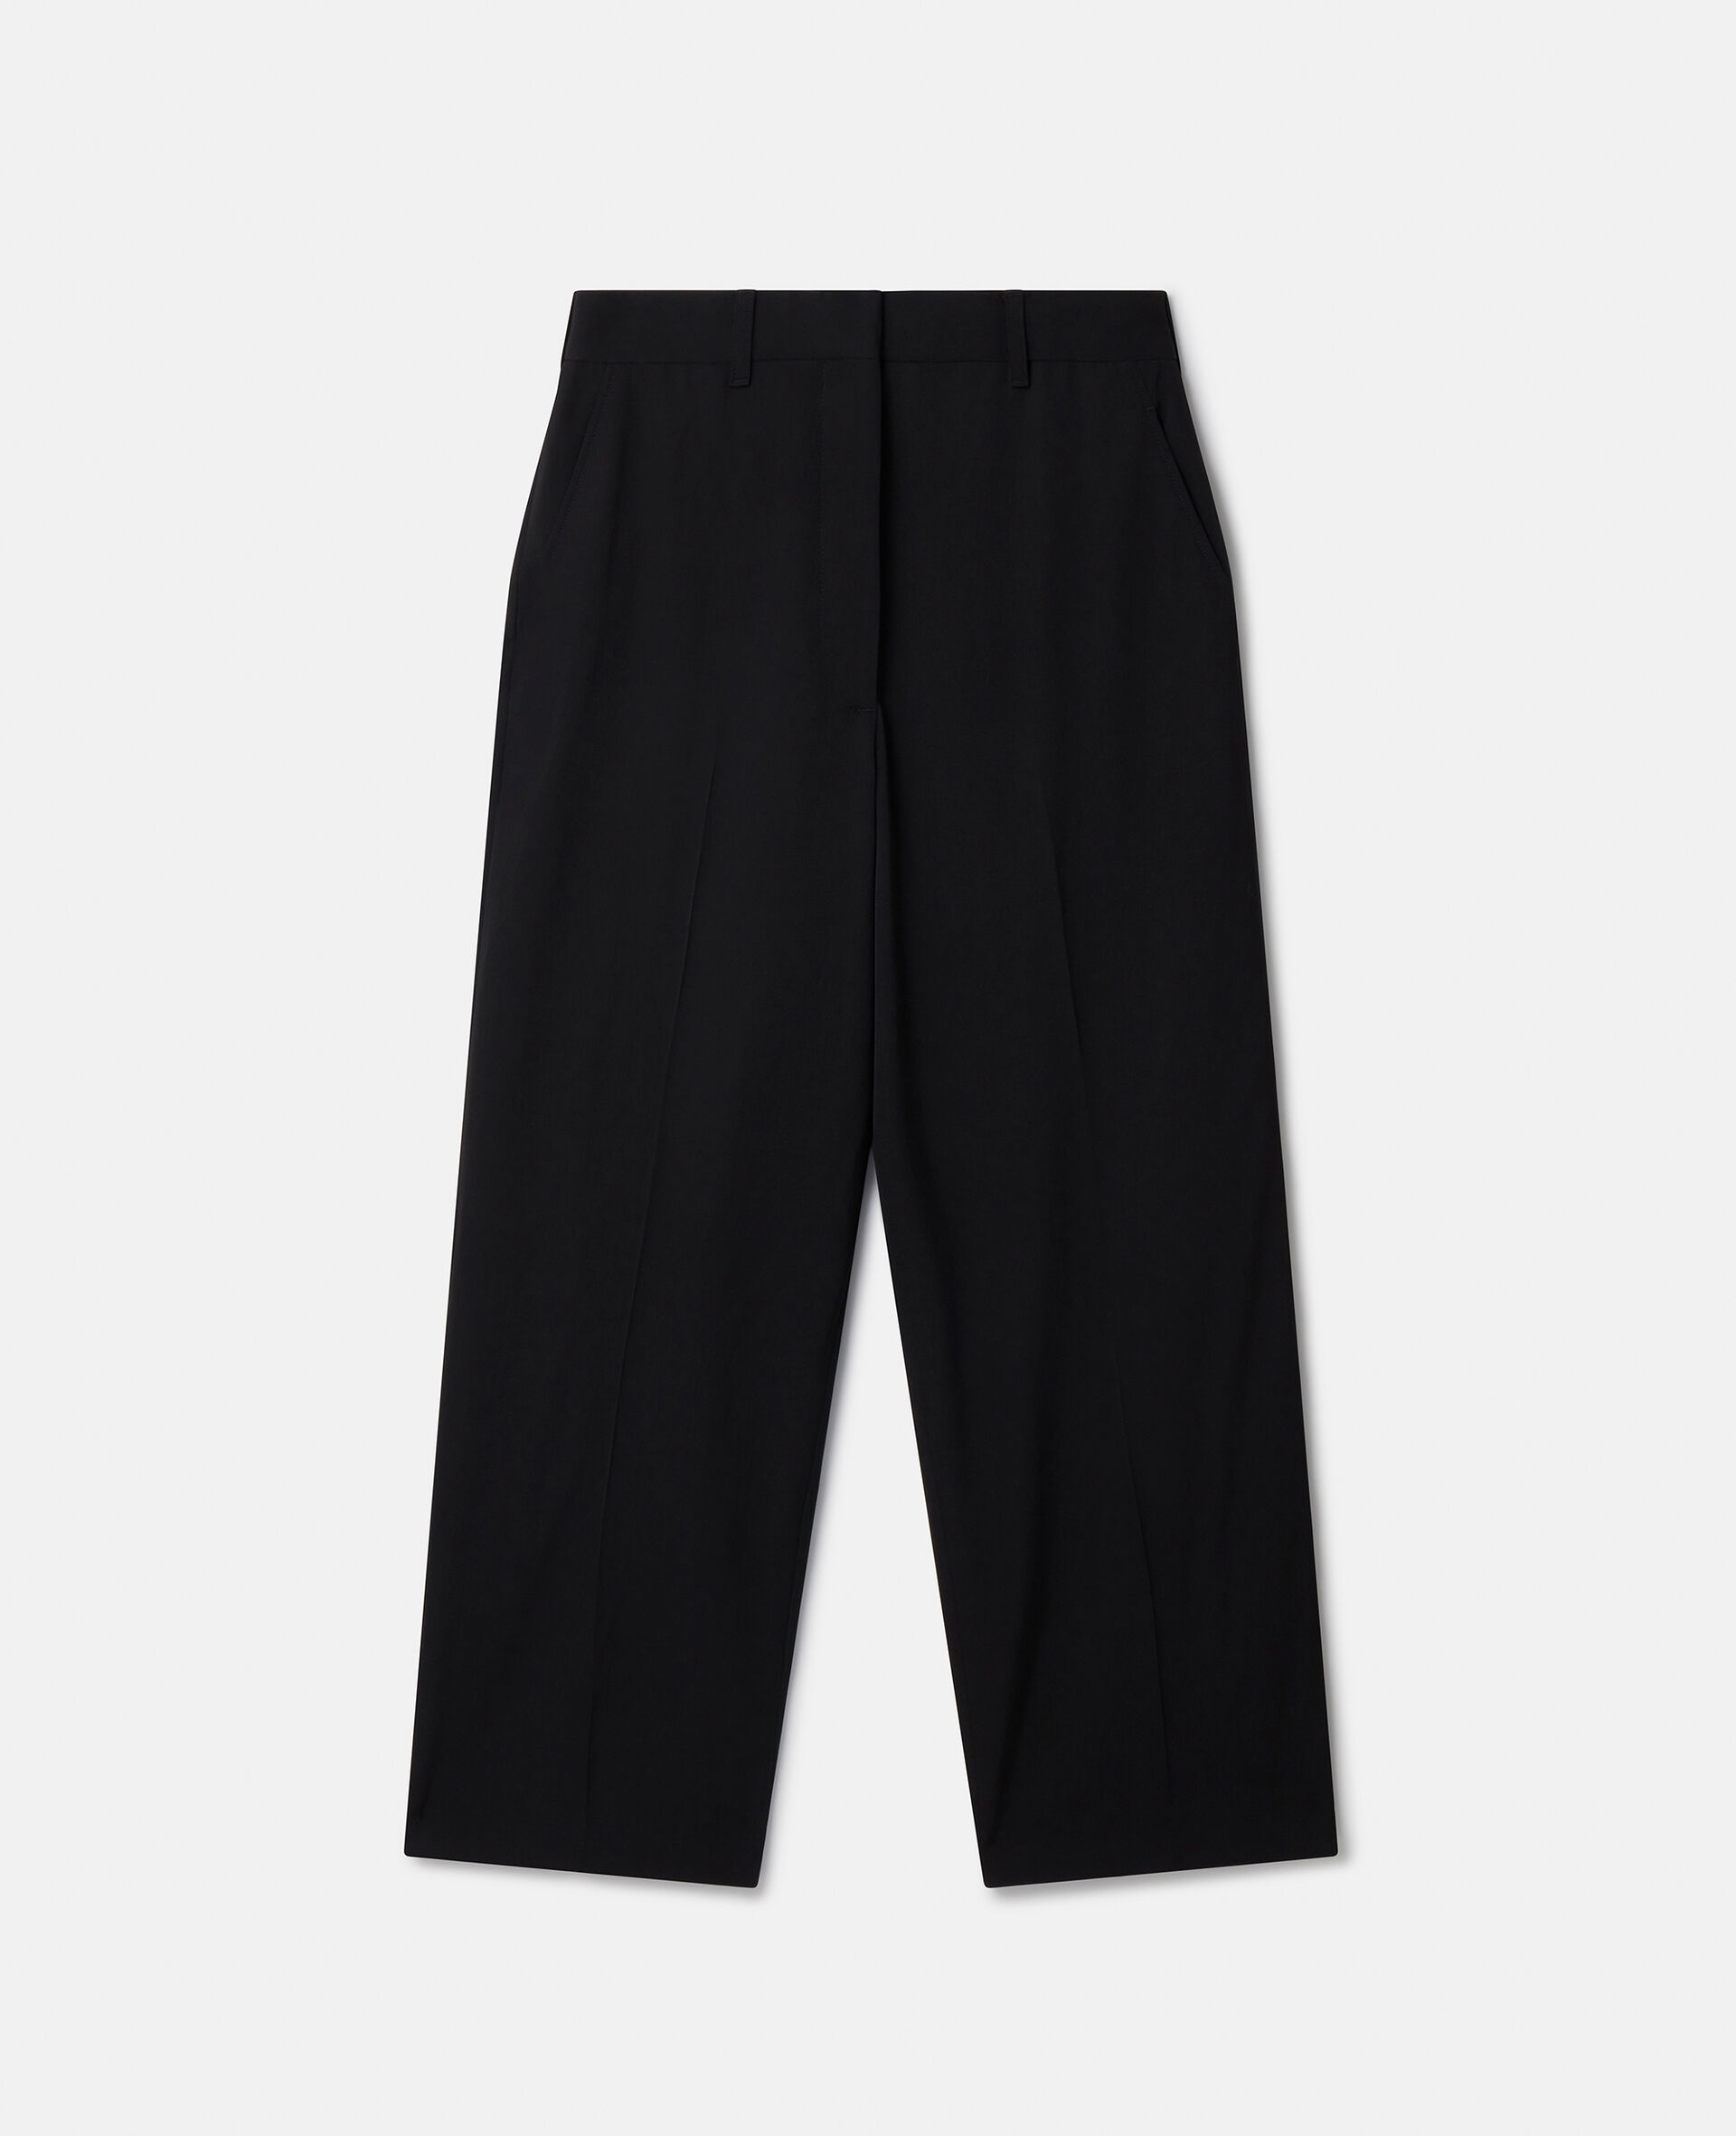 Wool Cropped Tailored Trousers-Black-large image number 0